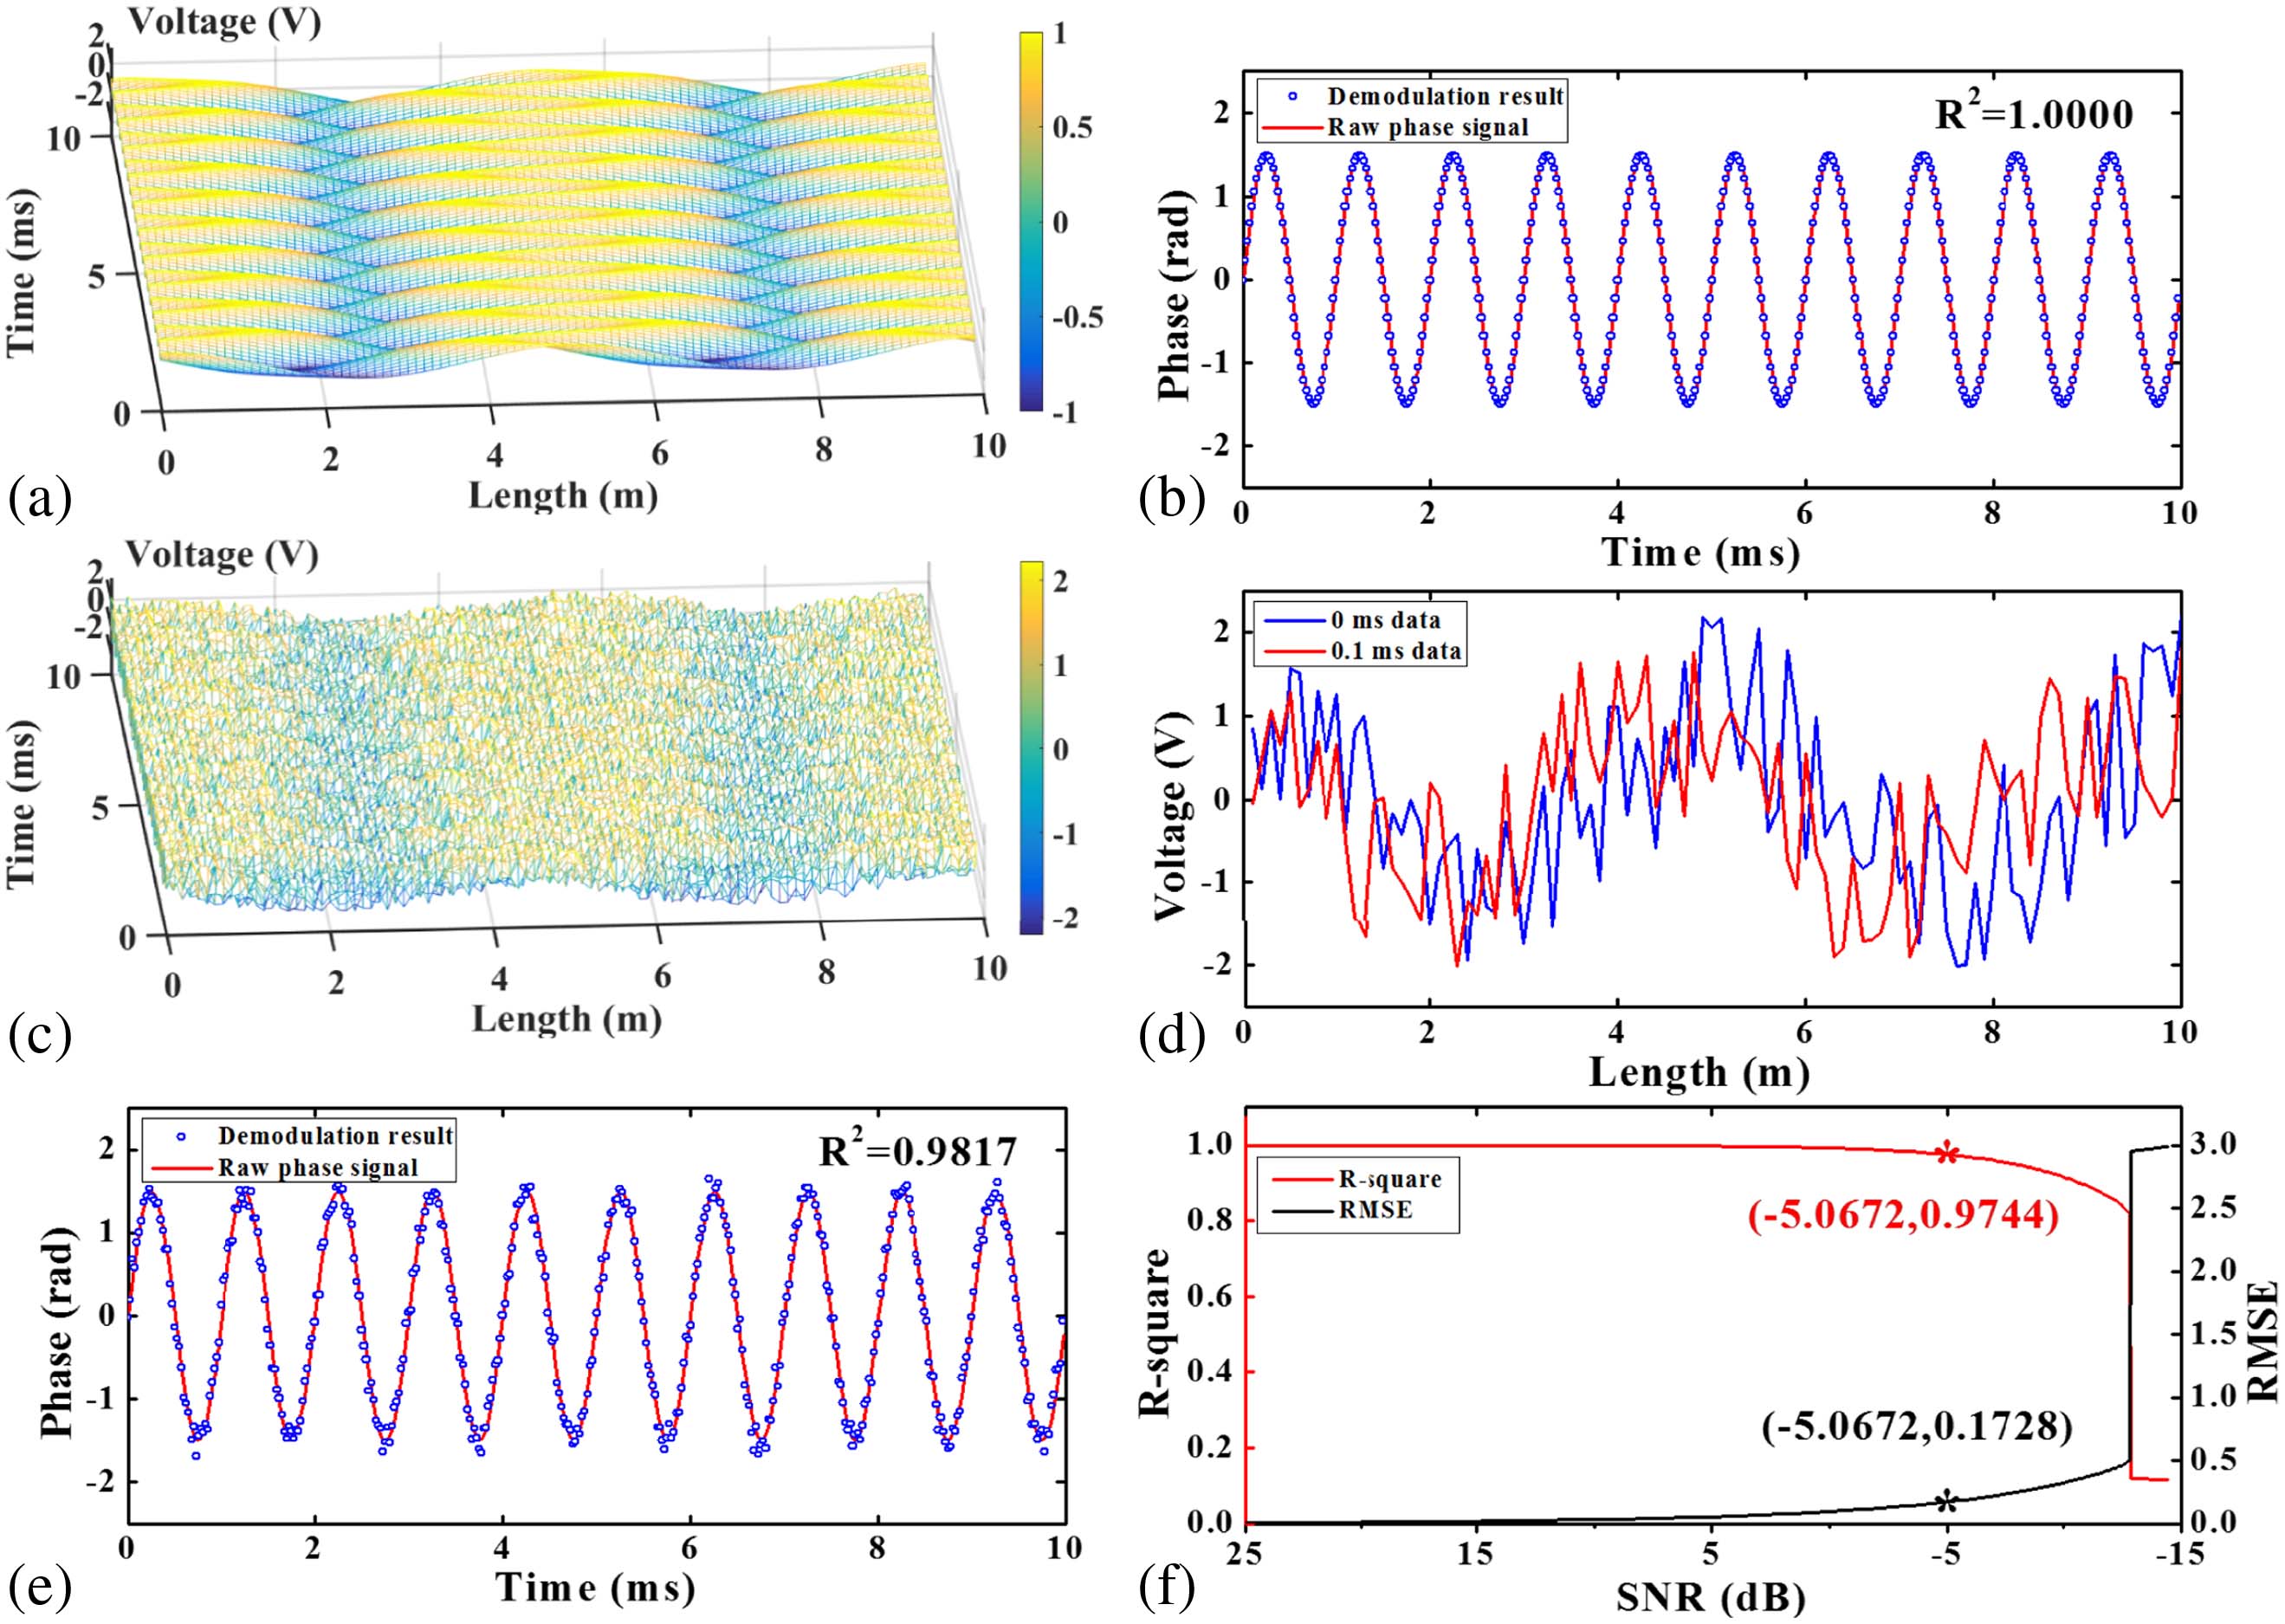 DFT simulation results. (a) 3D spatial-temporal profile of original a 20 MHz sinusoidal signal with a varying phase without noise. (b) Phase demodulation result of a 20 MHz sinusoidal signal without noise. (c) 3D spatial-temporal profile of a 20 MHz noise-added sinusoidal signal with a varying phase. (d) Two noise-added signal traces at the moments of t=0 and t=0.1 ms. (e) Phase demodulation result of a 20 MHz noise-loaded sinusoidal signal. (f) R-squared and RMSE of phase demodulation results at different SNRs.